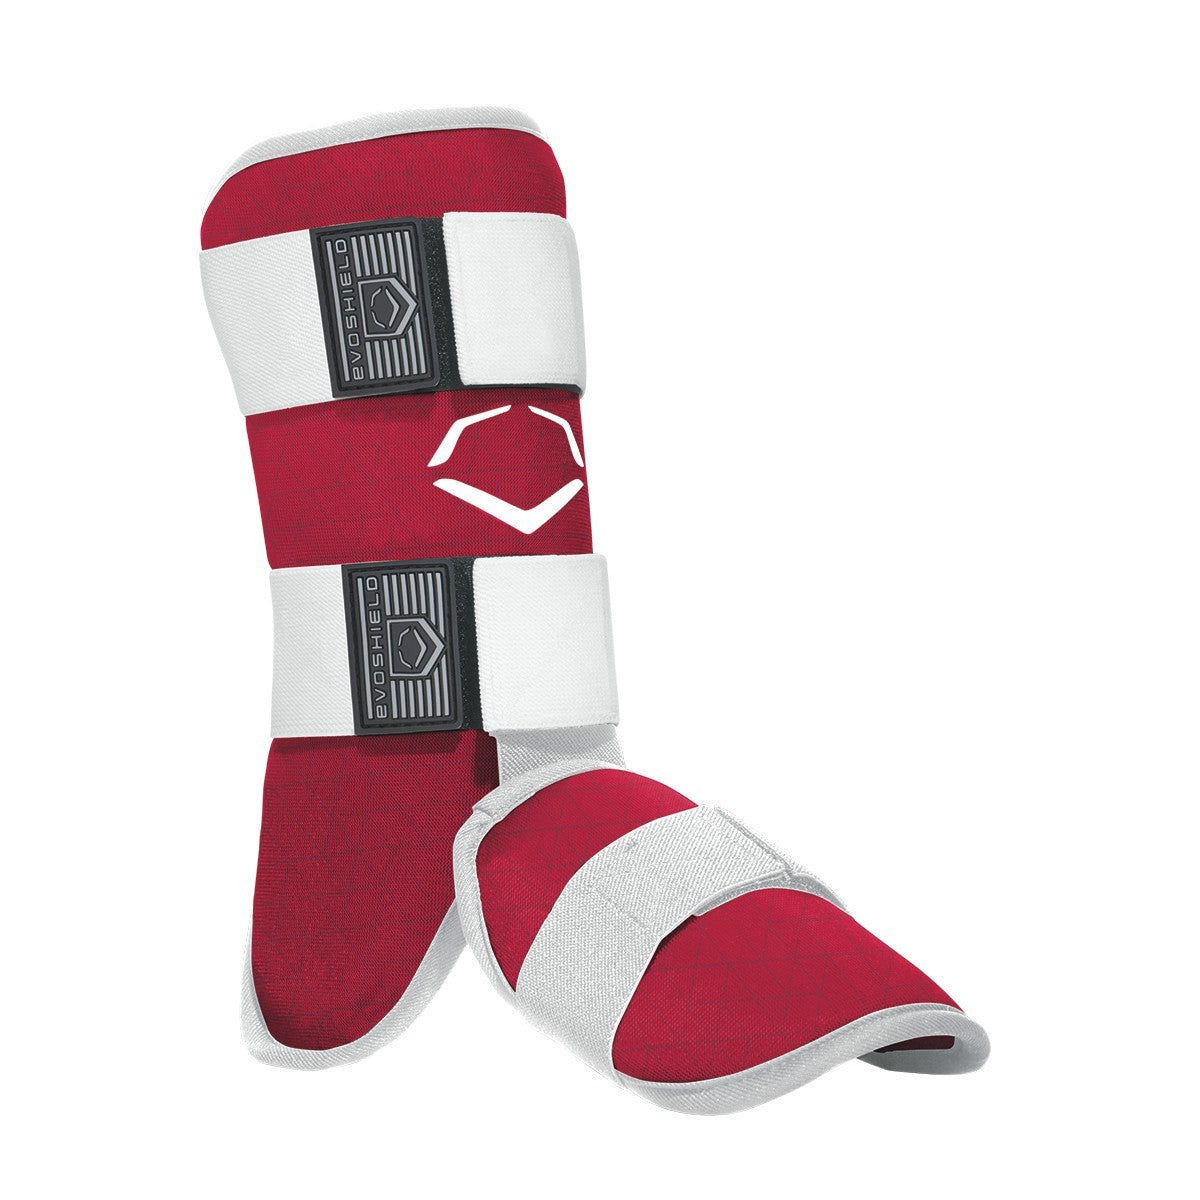 EVOCHARGE BATTER'S LEG GUARD (Available in 4 Colors) – Stripes and